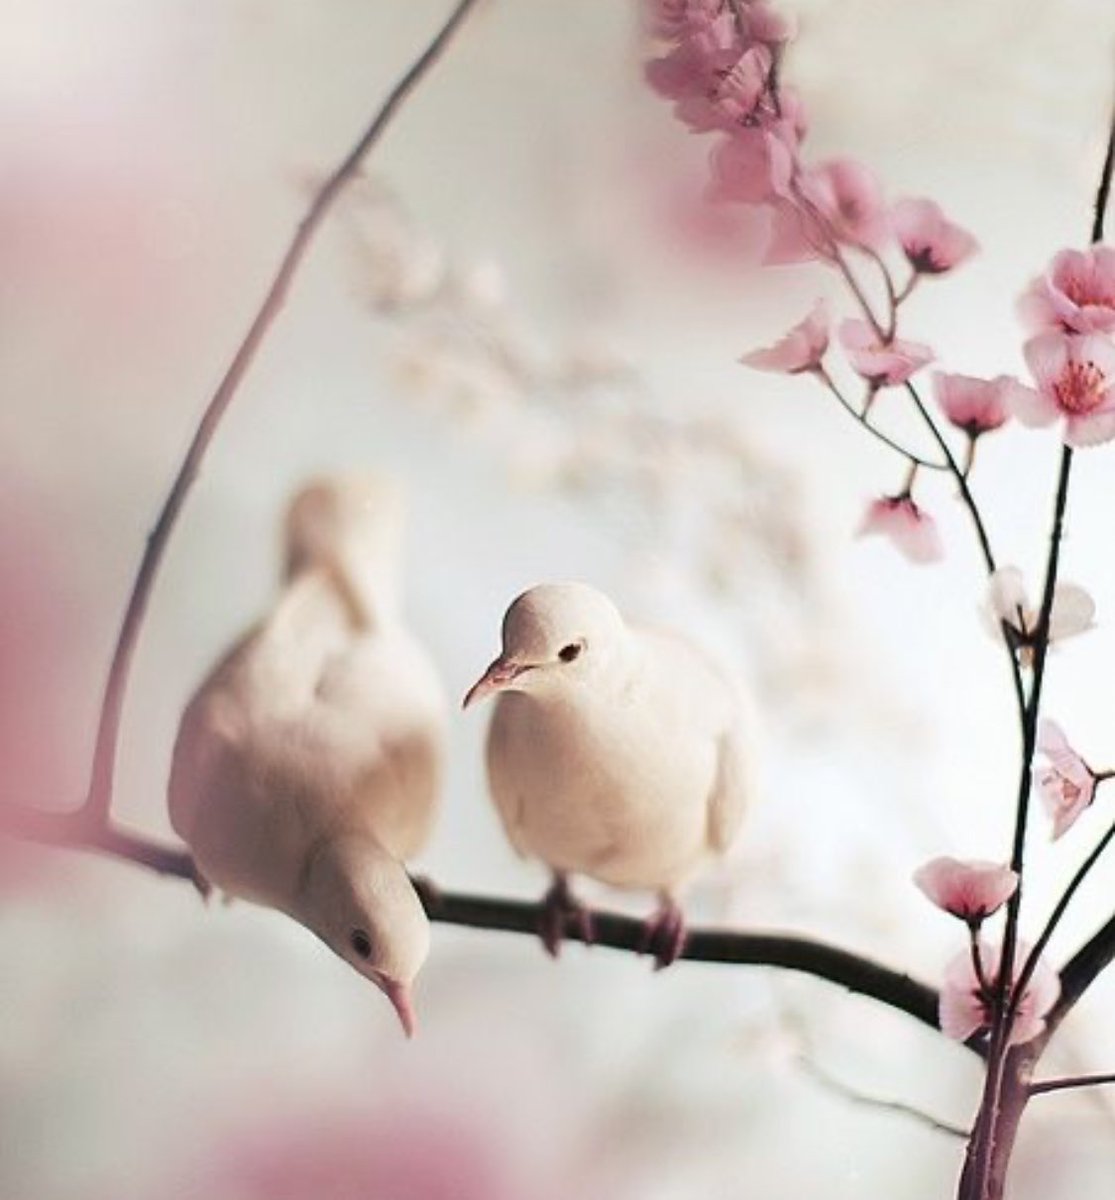 Wintersongs & Mourning Doves ;

Mourning in Words,
No more Peaches to Harvest-
Till next Spring Blossoms.~

Cooing by a Distant Dove-
Only Three Small Words to say.~

youtu.be/6Qbw3Weu8rQ?si…

#tanka #senryu #nature #winter 
#PeachBlossomNotes #dovenotes 
#poetrycommunity #poetry